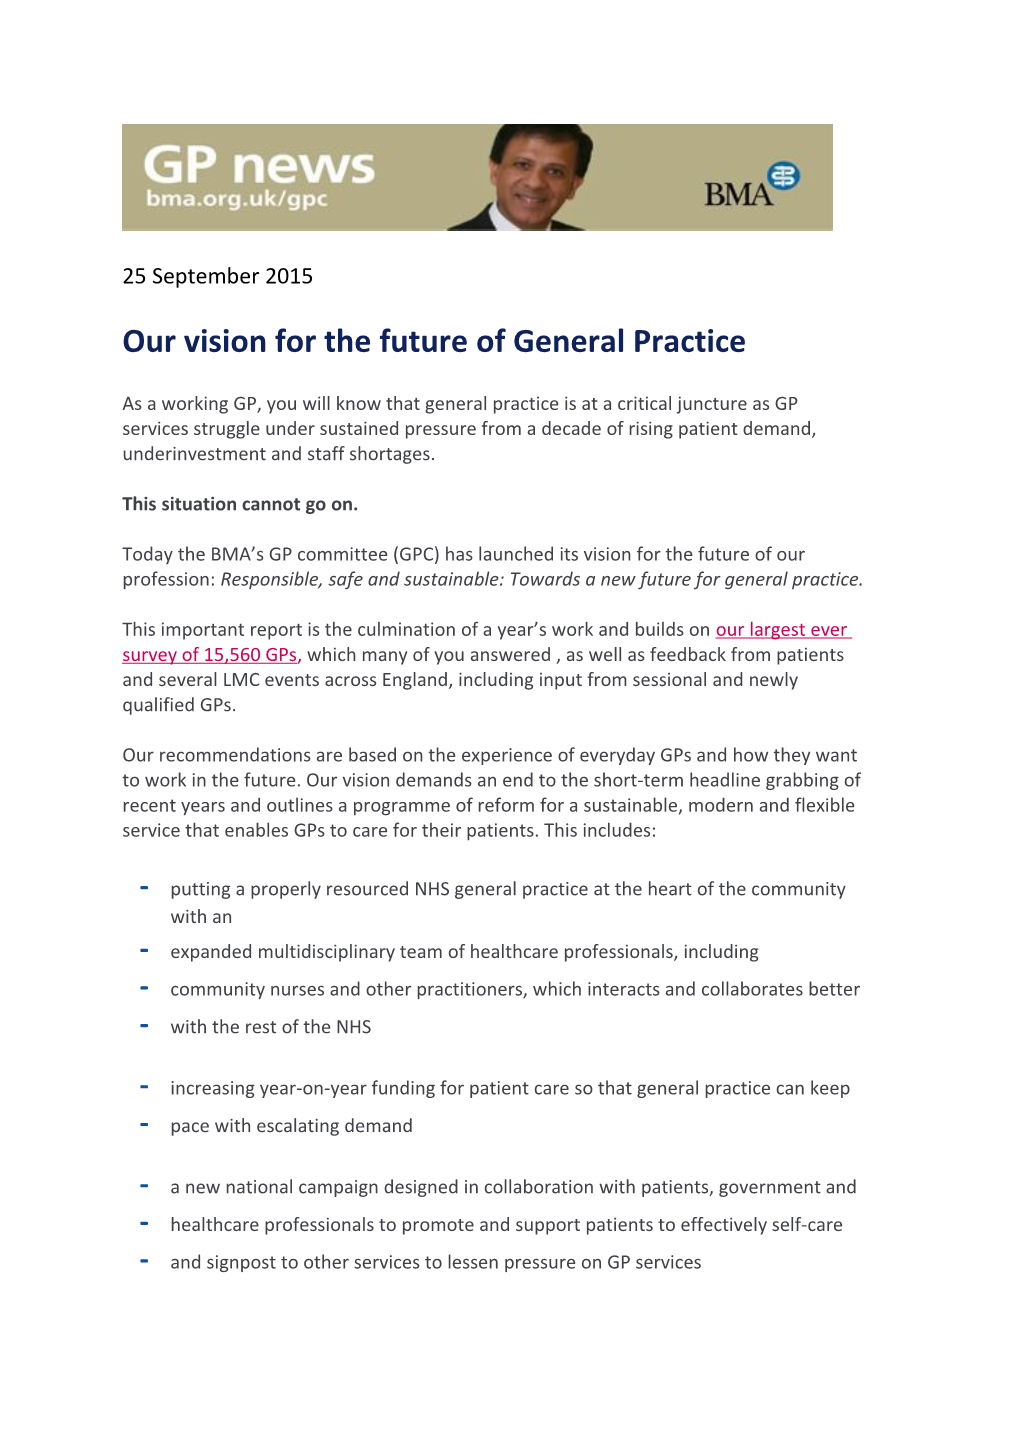 Our Vision for the Future of General Practice